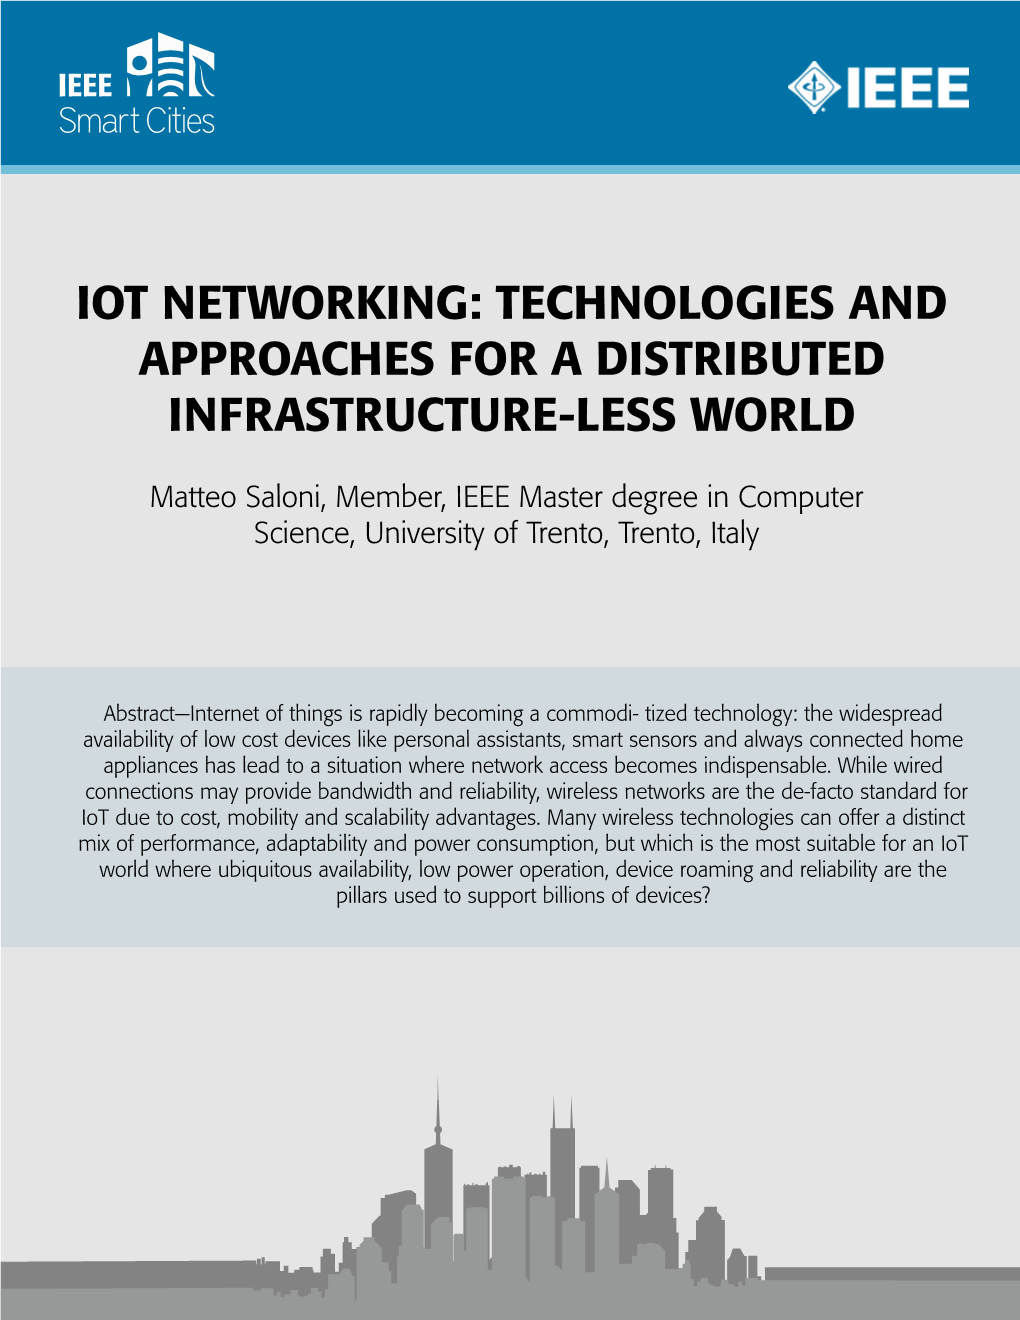 Iot Networking: Technologies and Approaches for a Distributed Infrastructure-Less World